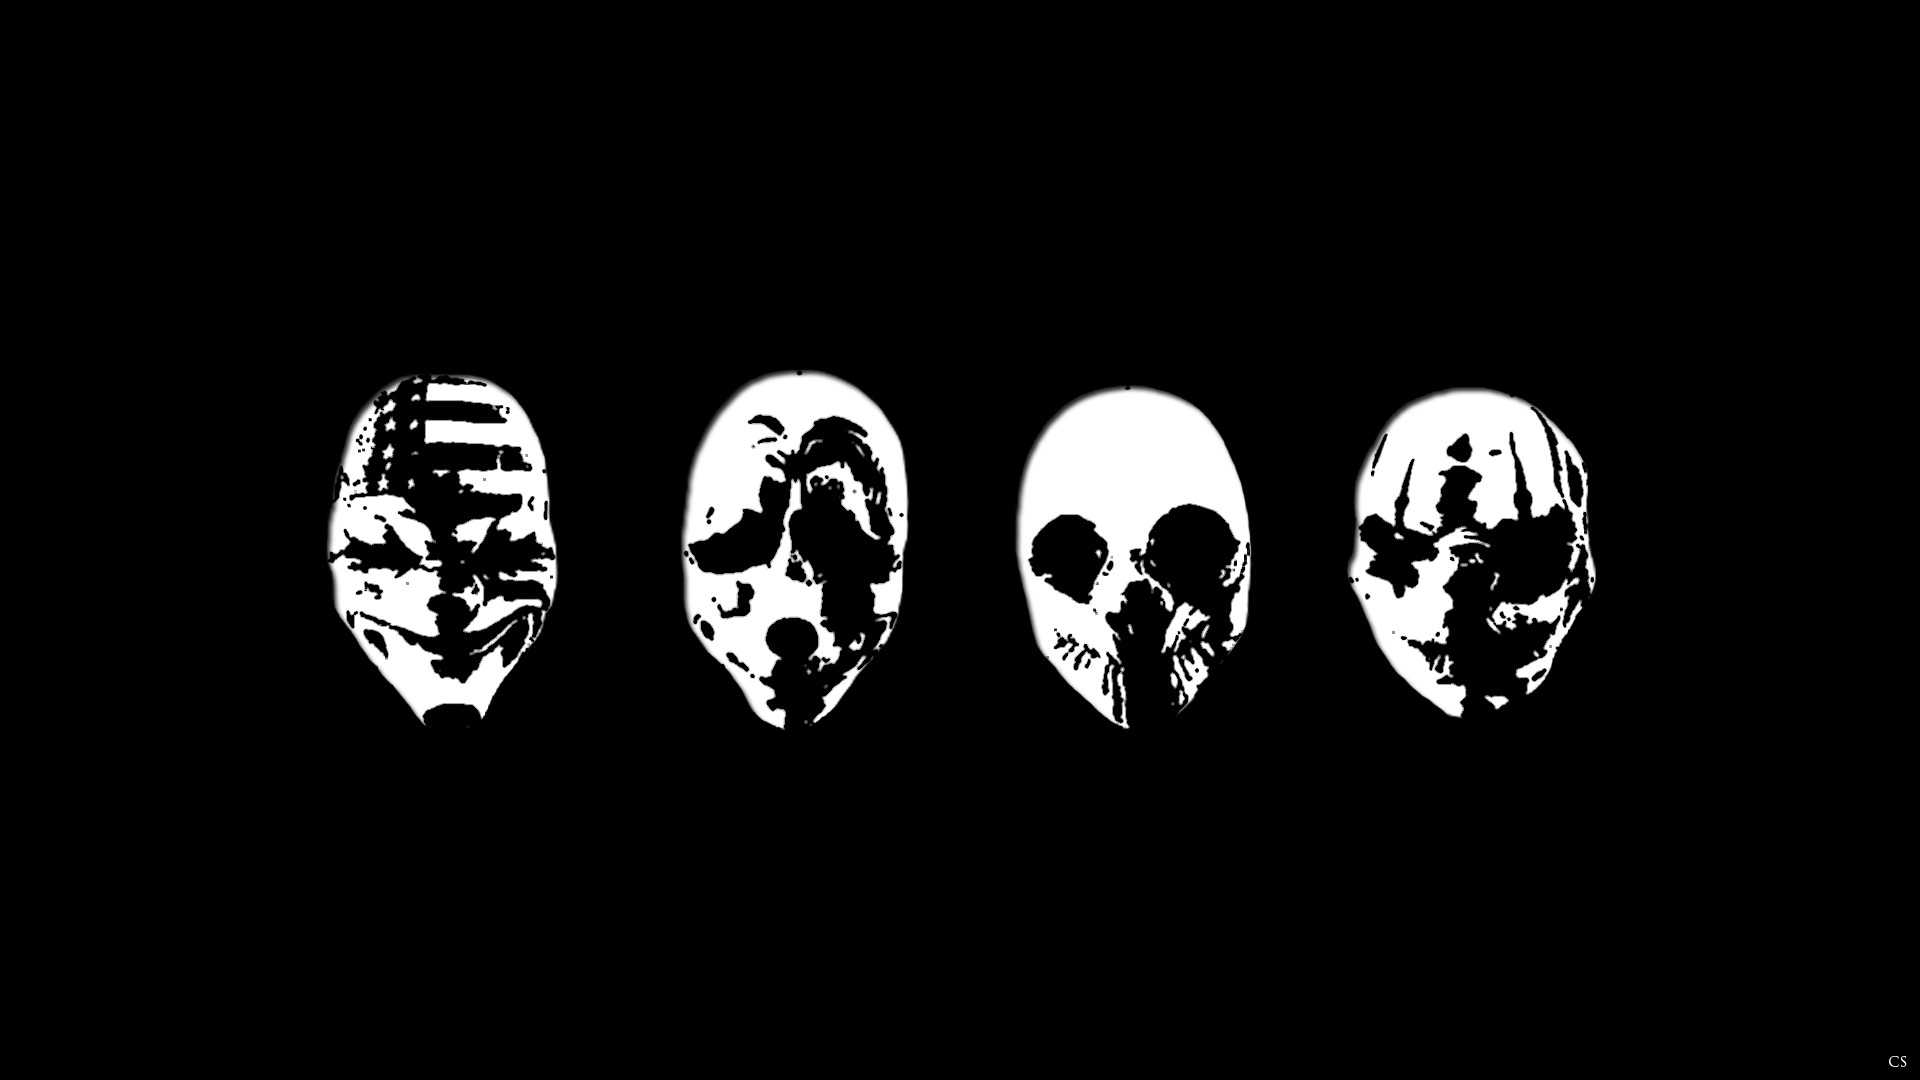 1920x1080 Download wallpaper mask, Art, Payday 2, Payday, section games in resoluti